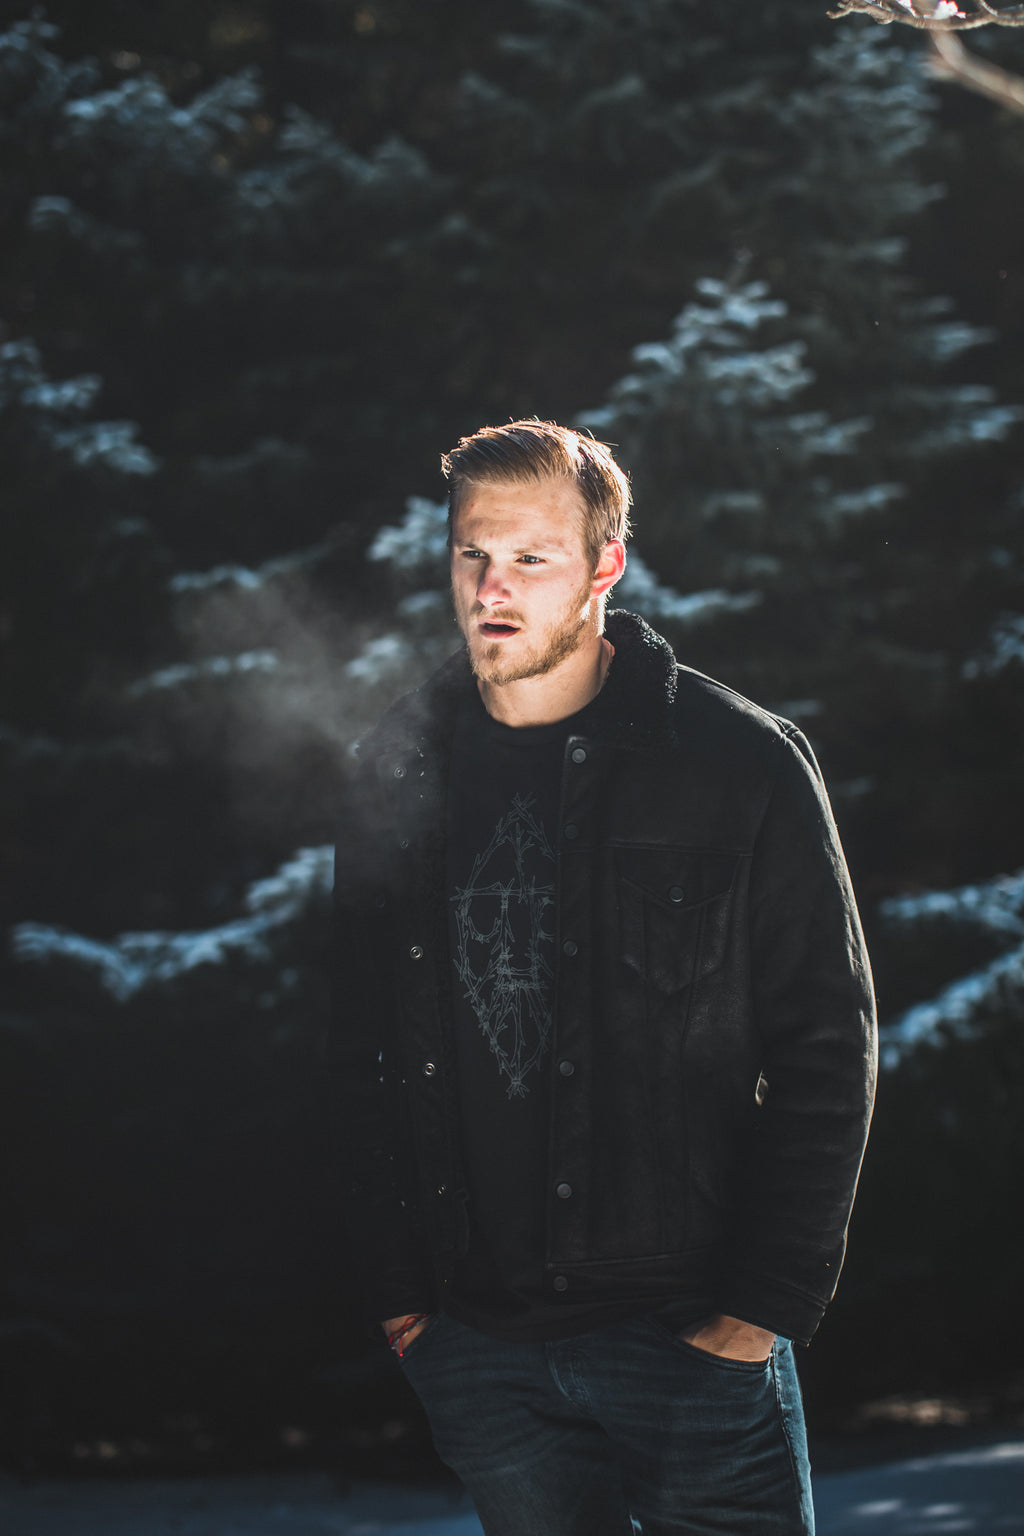 Descended from Odin, Wanderers Warriors,Organic T-shirts, Staithes Hoodie, Merino Wool Hoodie, Odin, TYR, Thor, Ragnar, Bjorn Ironside, Vikings, Anglo Saxon, Norse, Fitness Gear, Horns, Jewellery, Silver, Alexander Ludwig